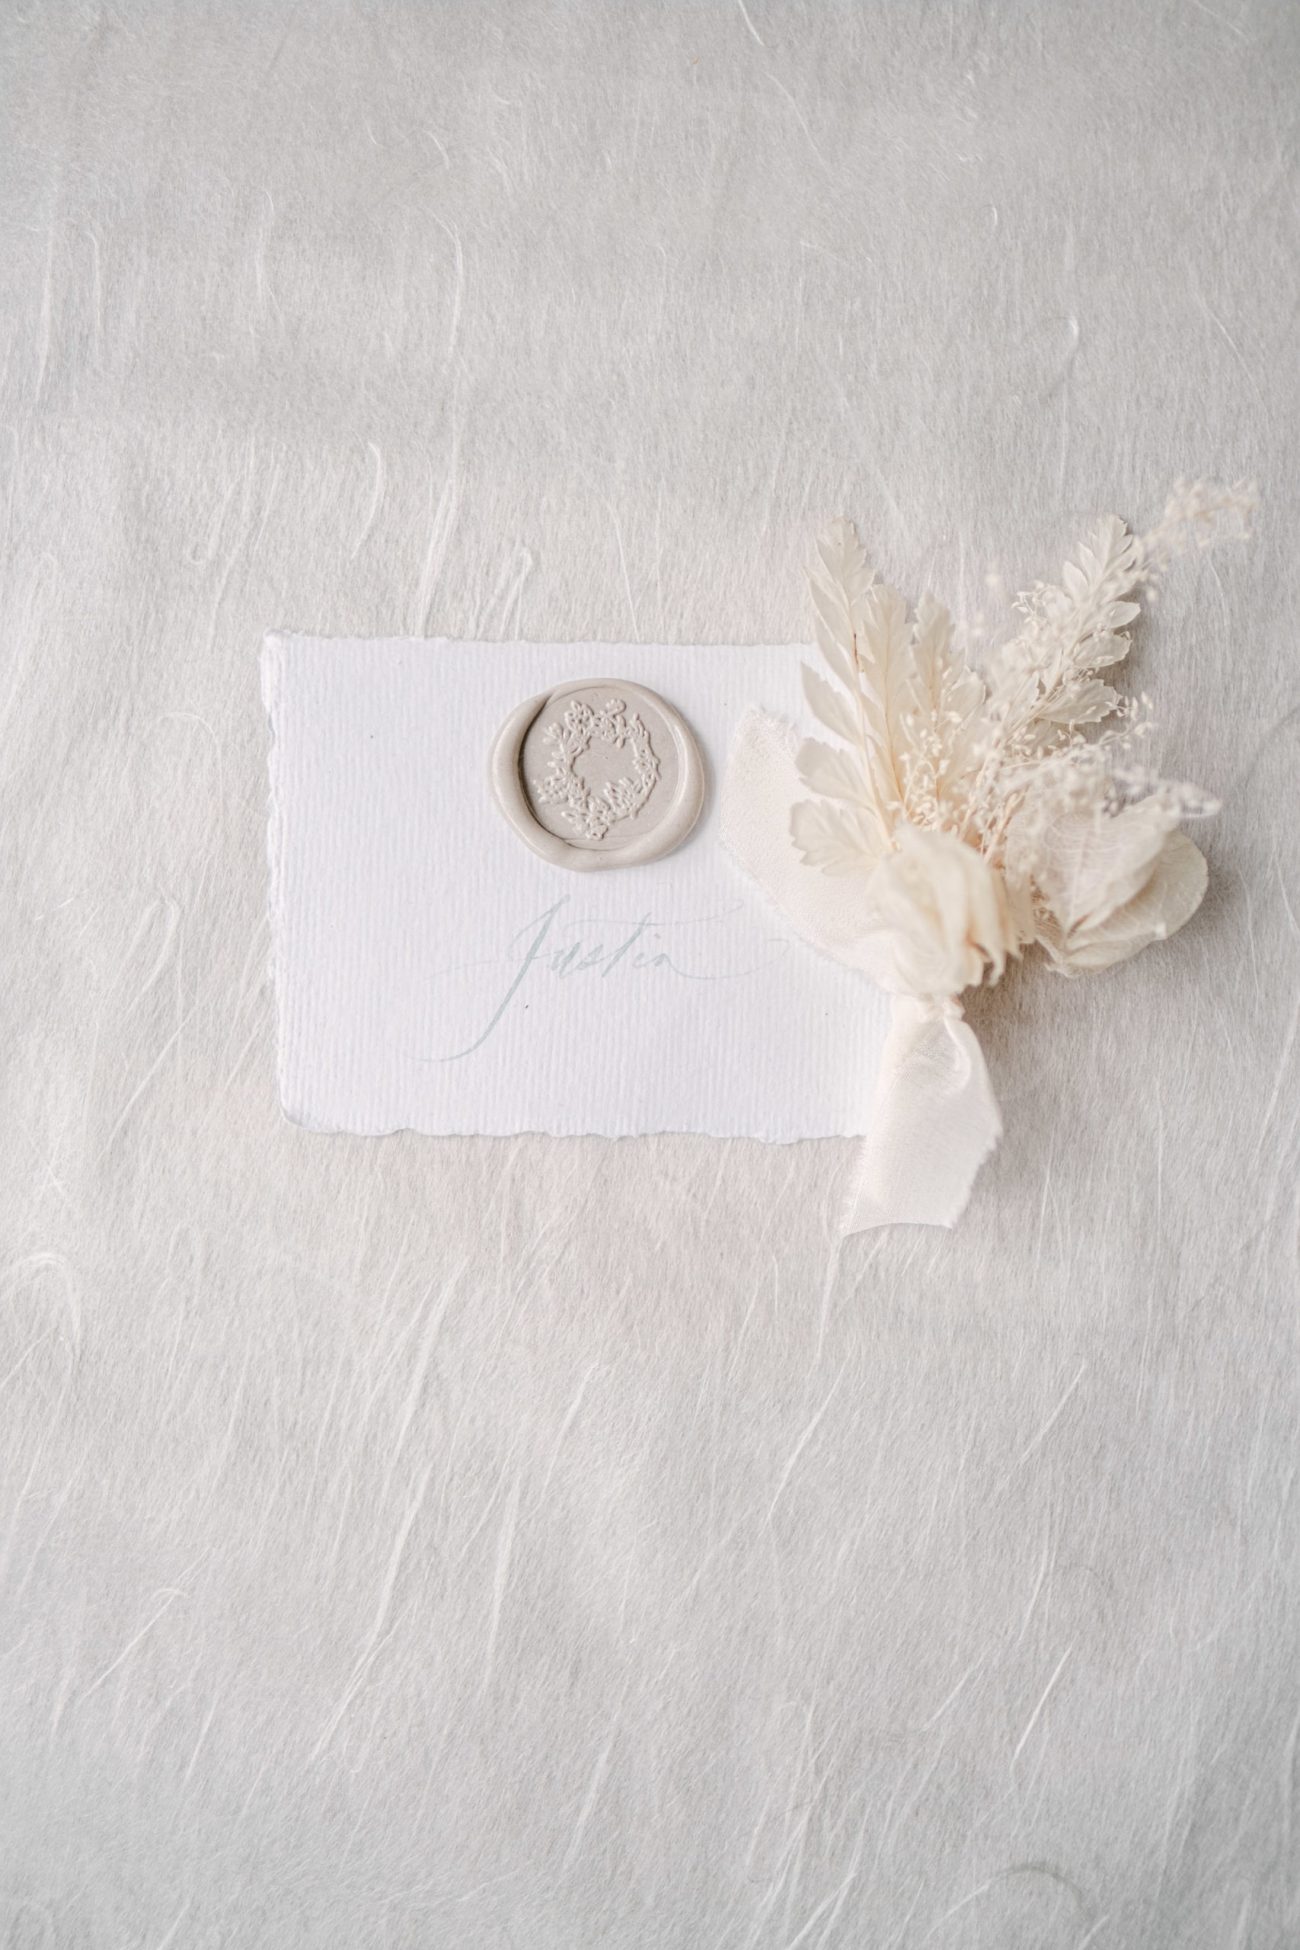 nude wax seals place card